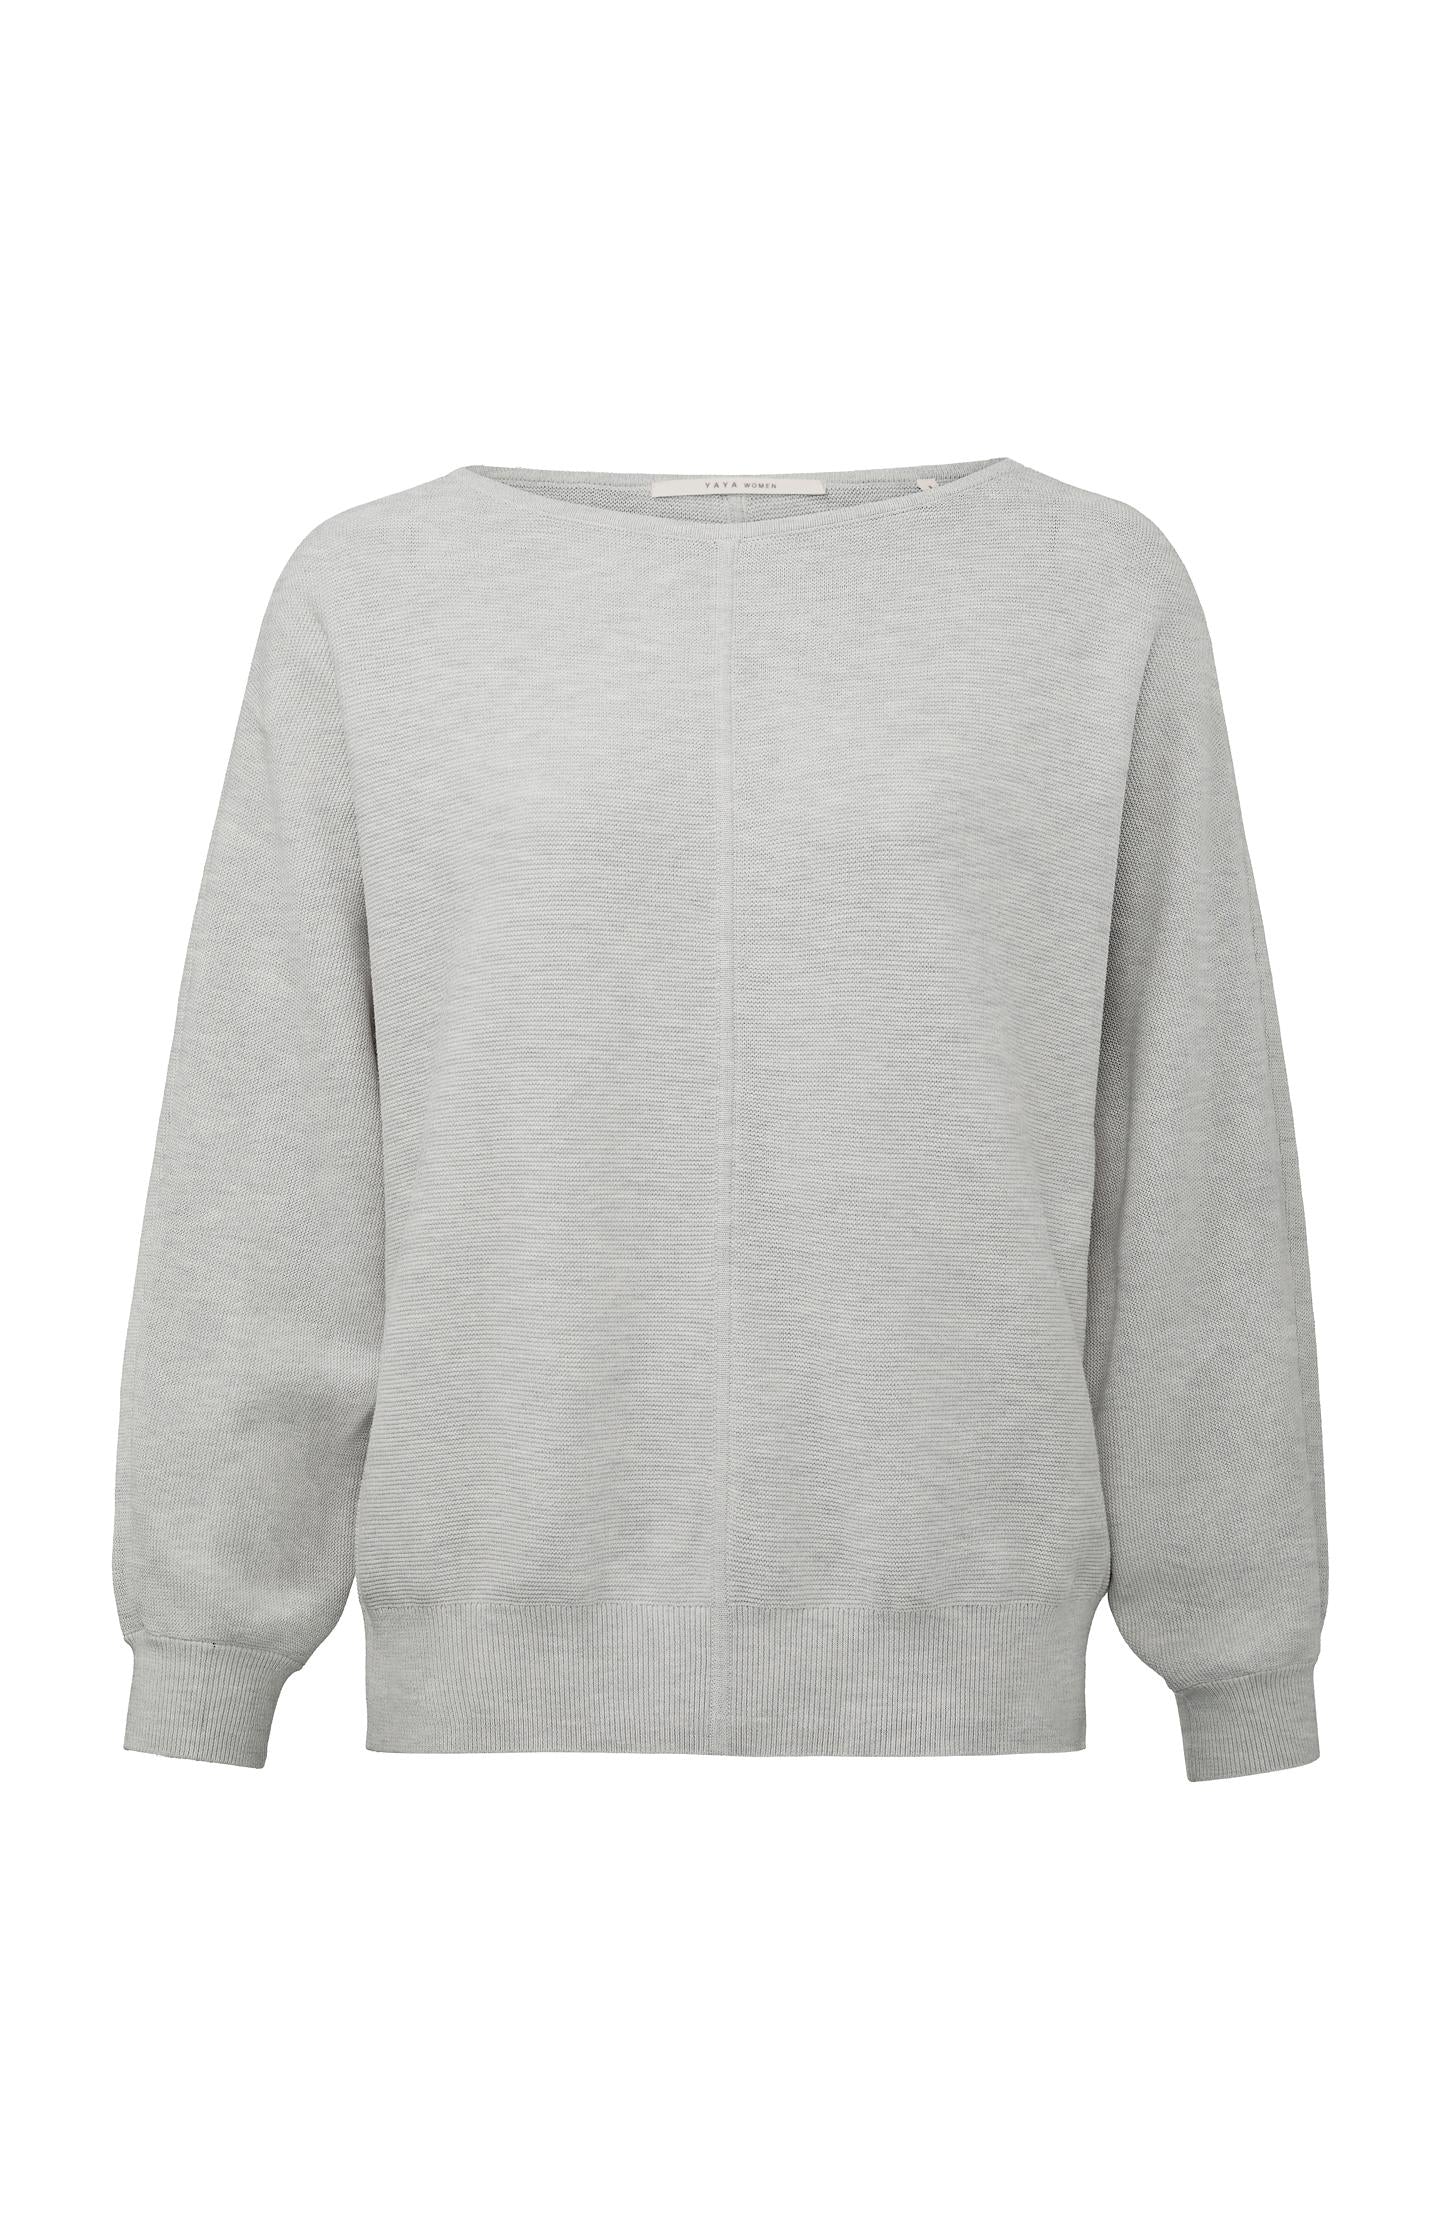 Boatneck sweater with long batwing sleeves in a relaxed fit - Type: product